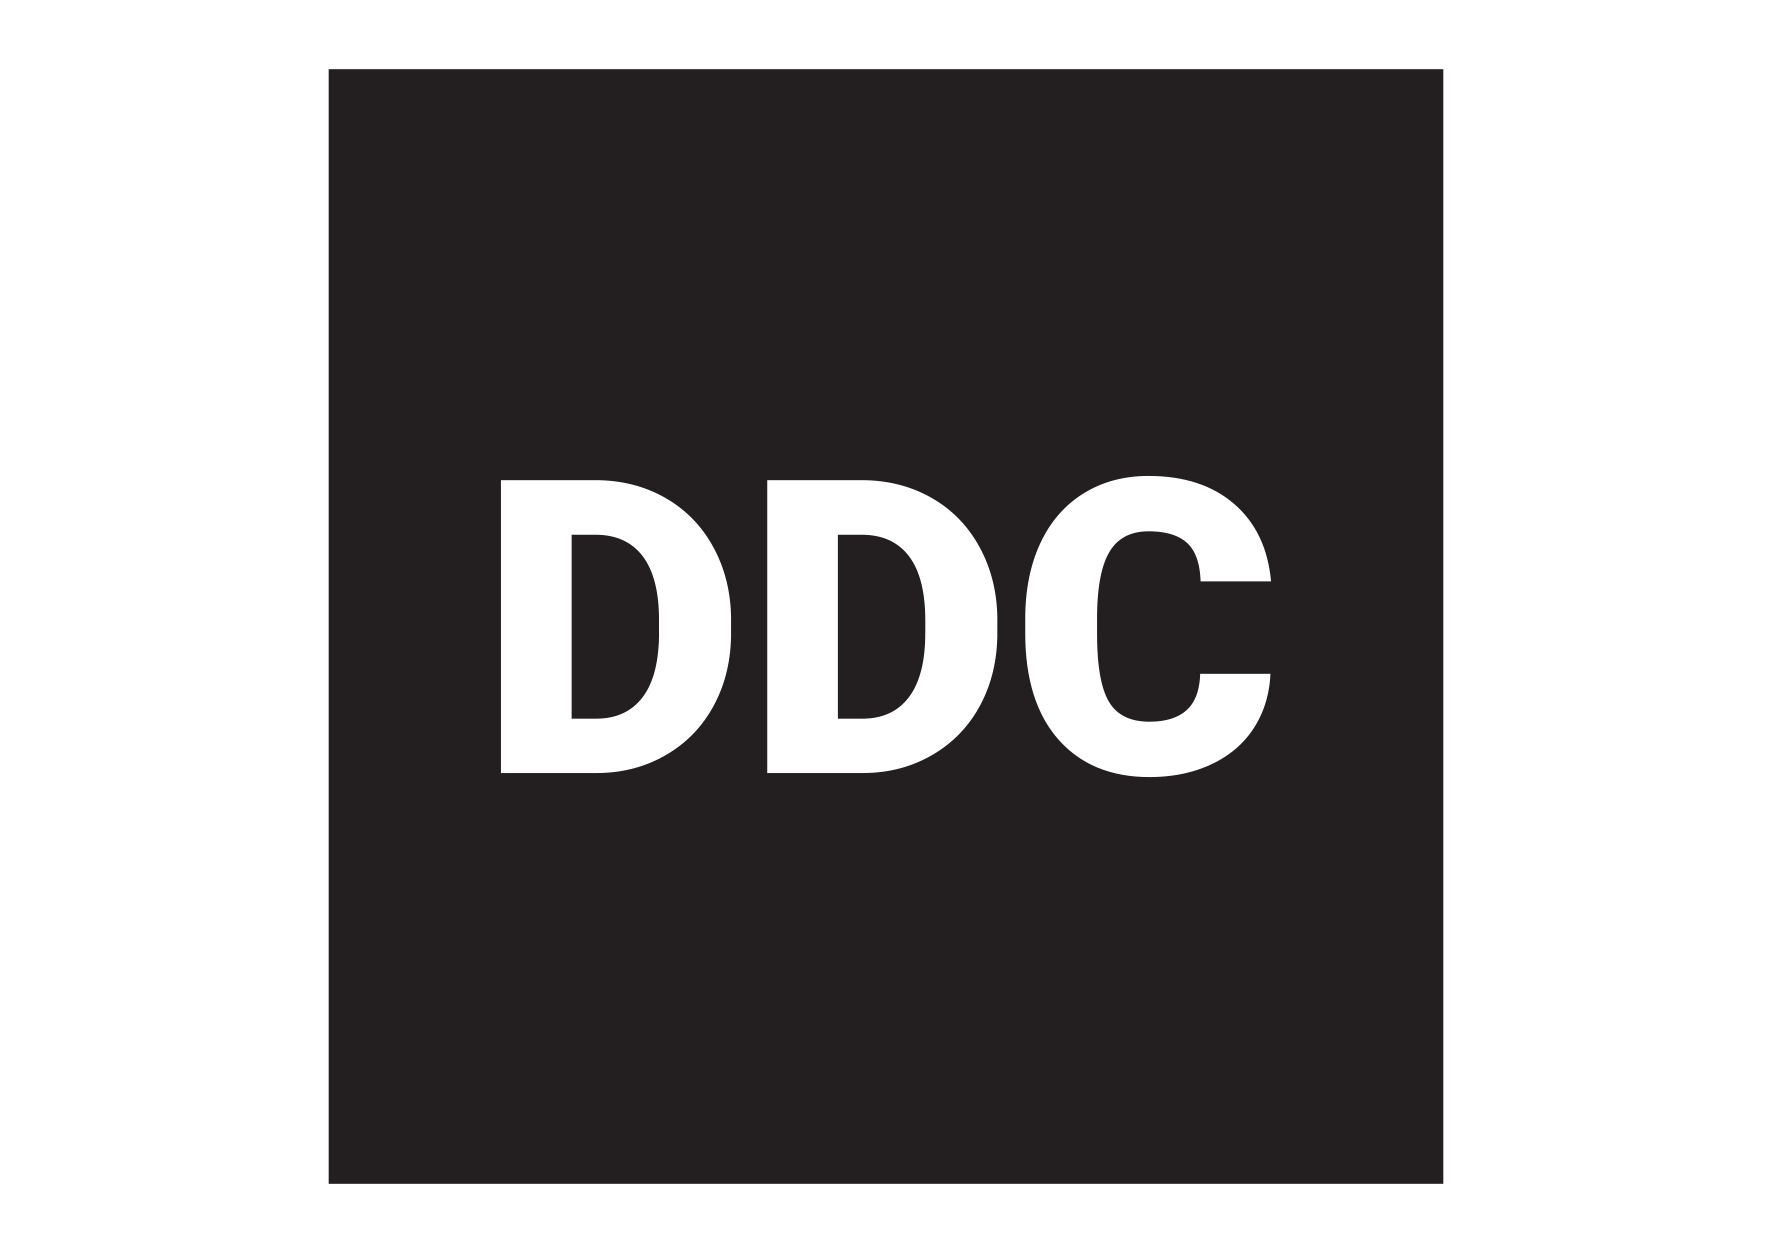 Logo of DDC Financial Group